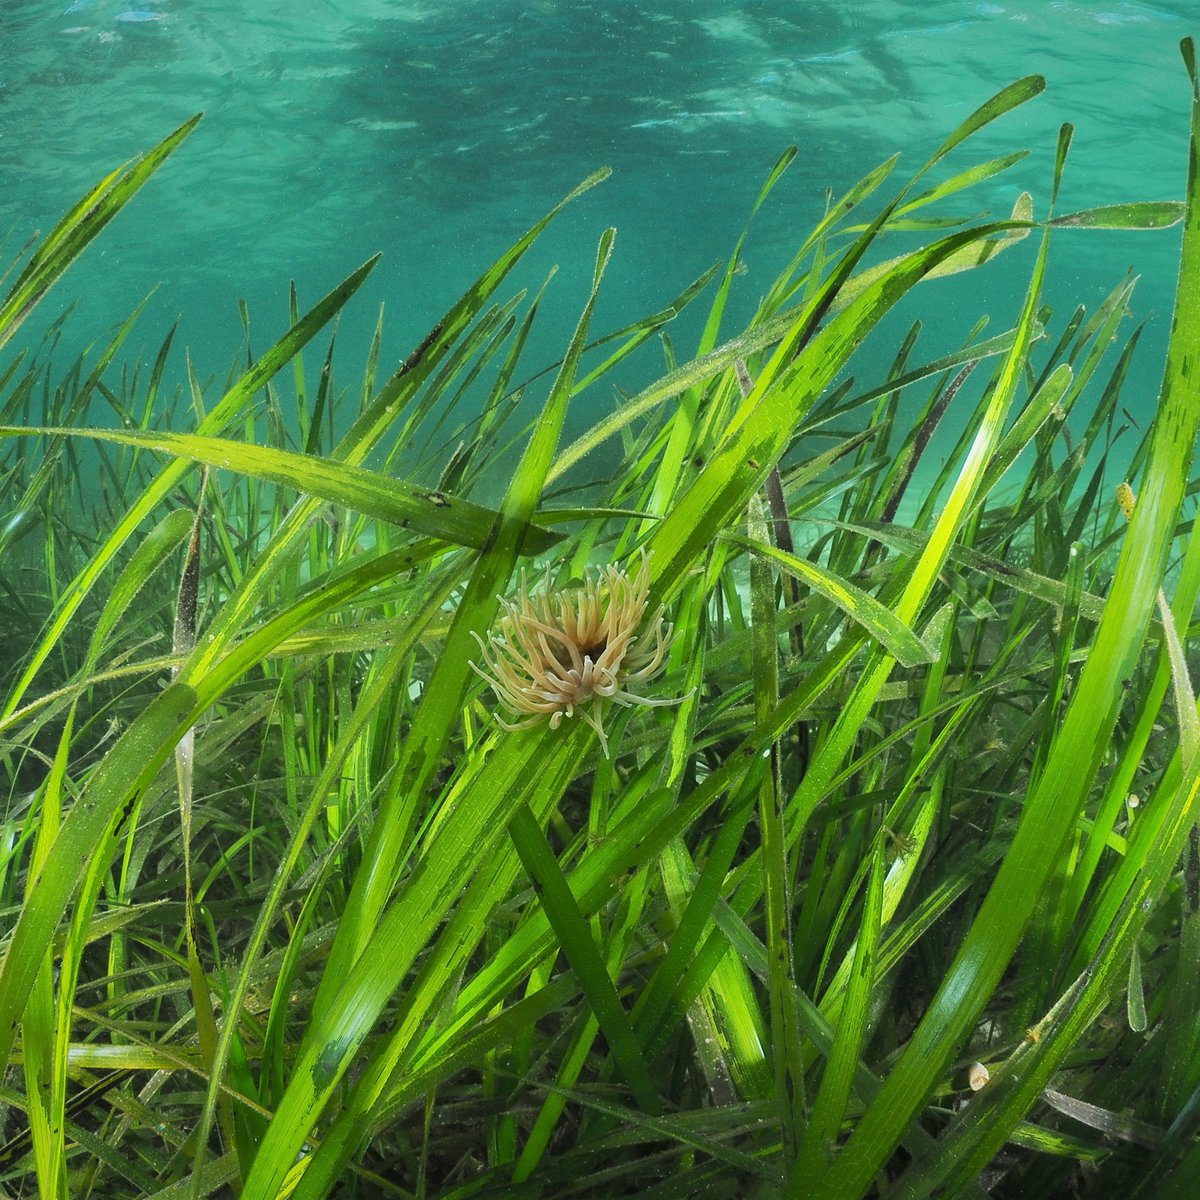 Are you attending the UK #Seagrass Symposium this week?🌿 Our Chair @TonyJuniper will give the keynote and our @EULIFERemedies team will be speaking on panels including seagrass ecology and threats and protection. See the programme: oceanconservationtrust.org/app/uploads/UK… #UKSS23 @OceanCTrust